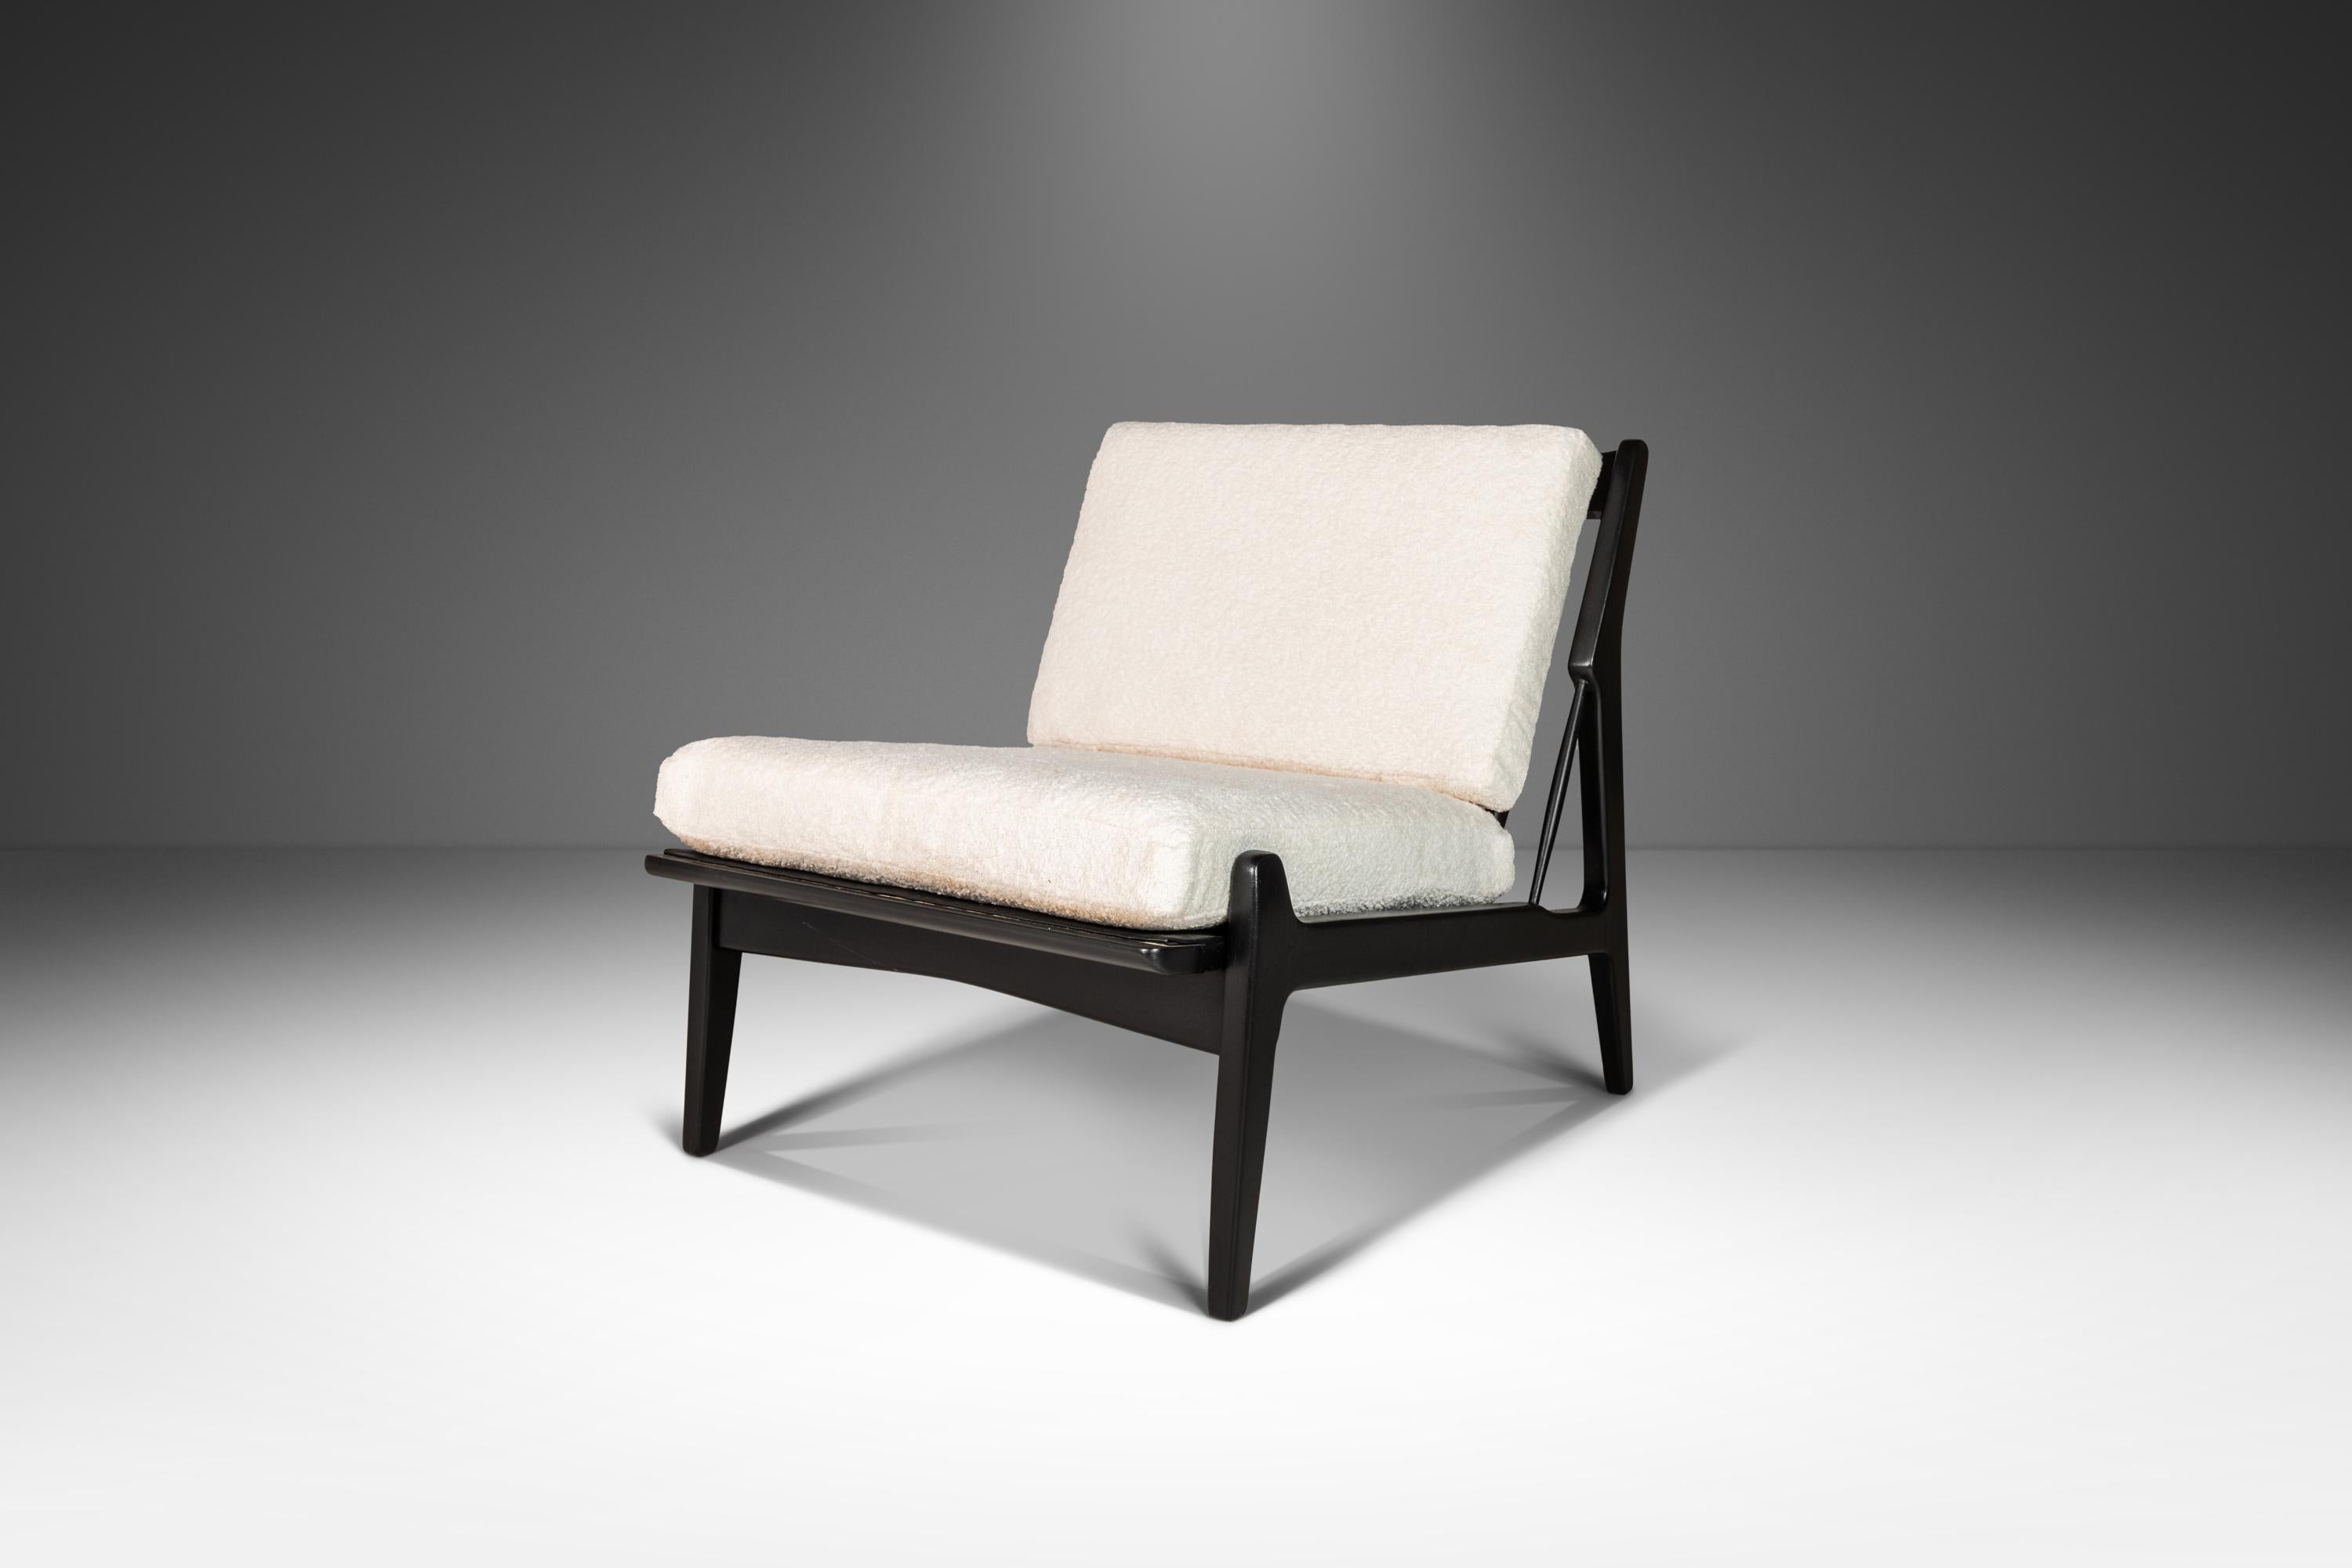 Set of Two Ebonized Lounge Chairs in Bouclé by Ib Kofod Larsen for Selig, 1950s For Sale 10